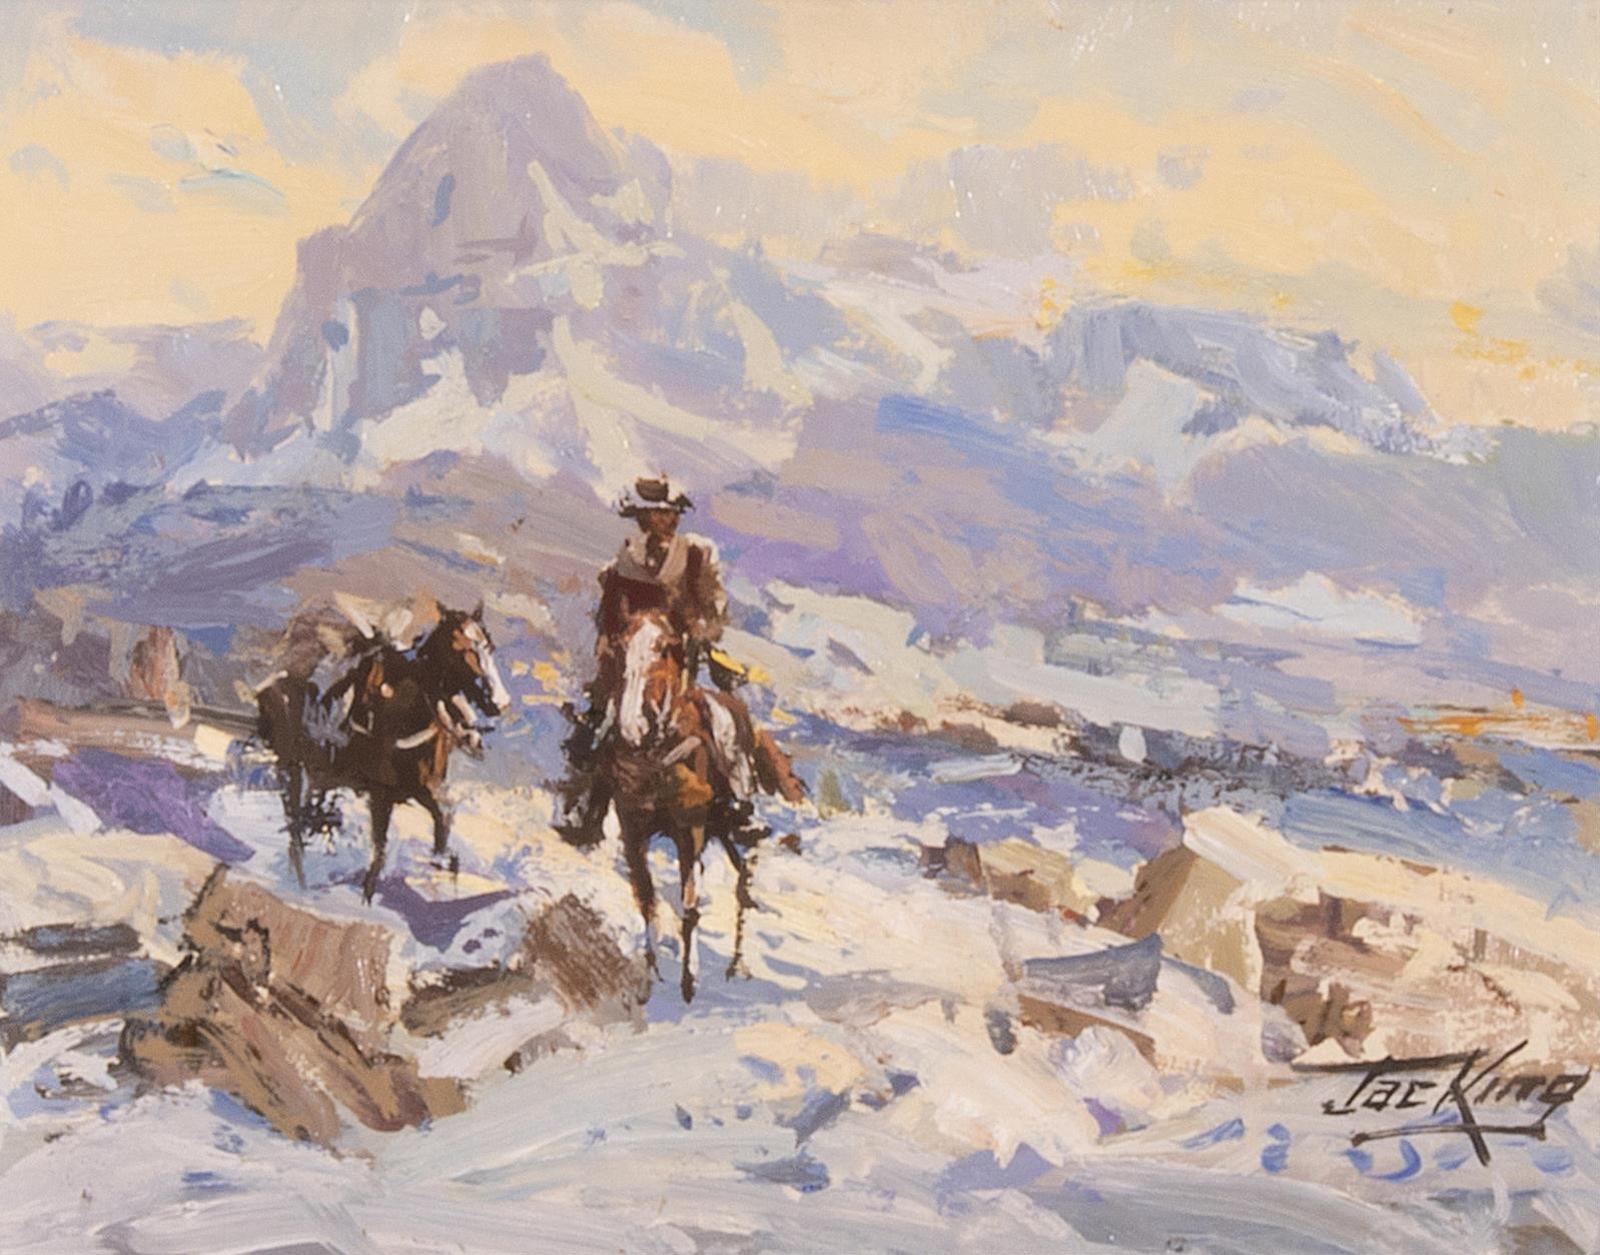 Jack [Jac] Elmo King (1920-1998) - Rider And Pack Horse In A Mountain Pass